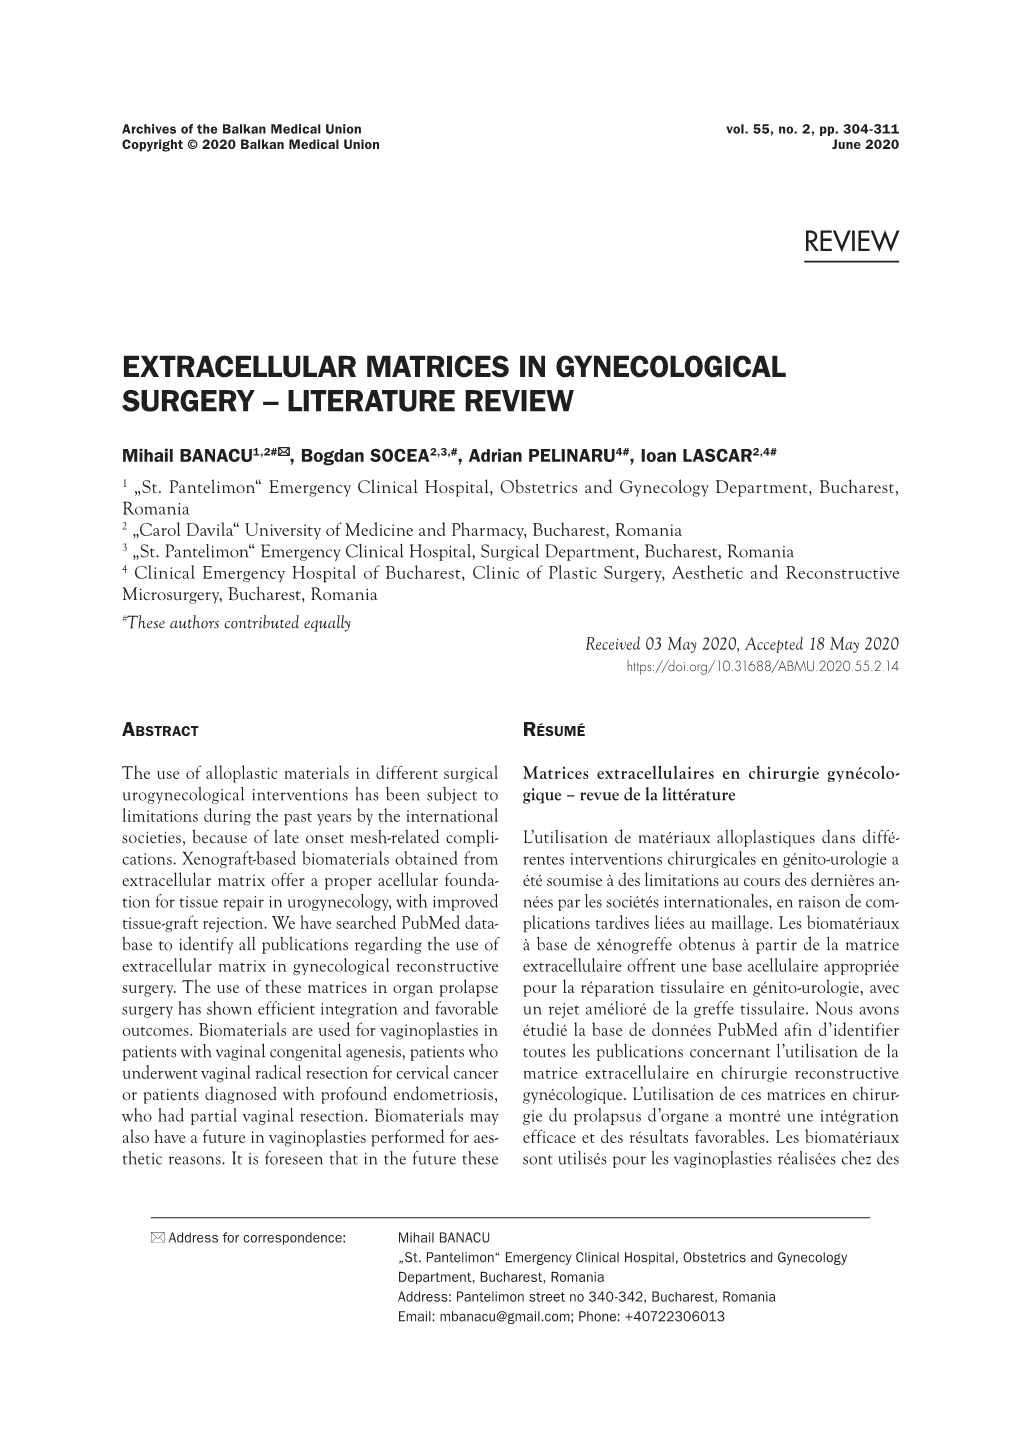 Extracellular Matrices in Gynecological Surgery – Literature Review